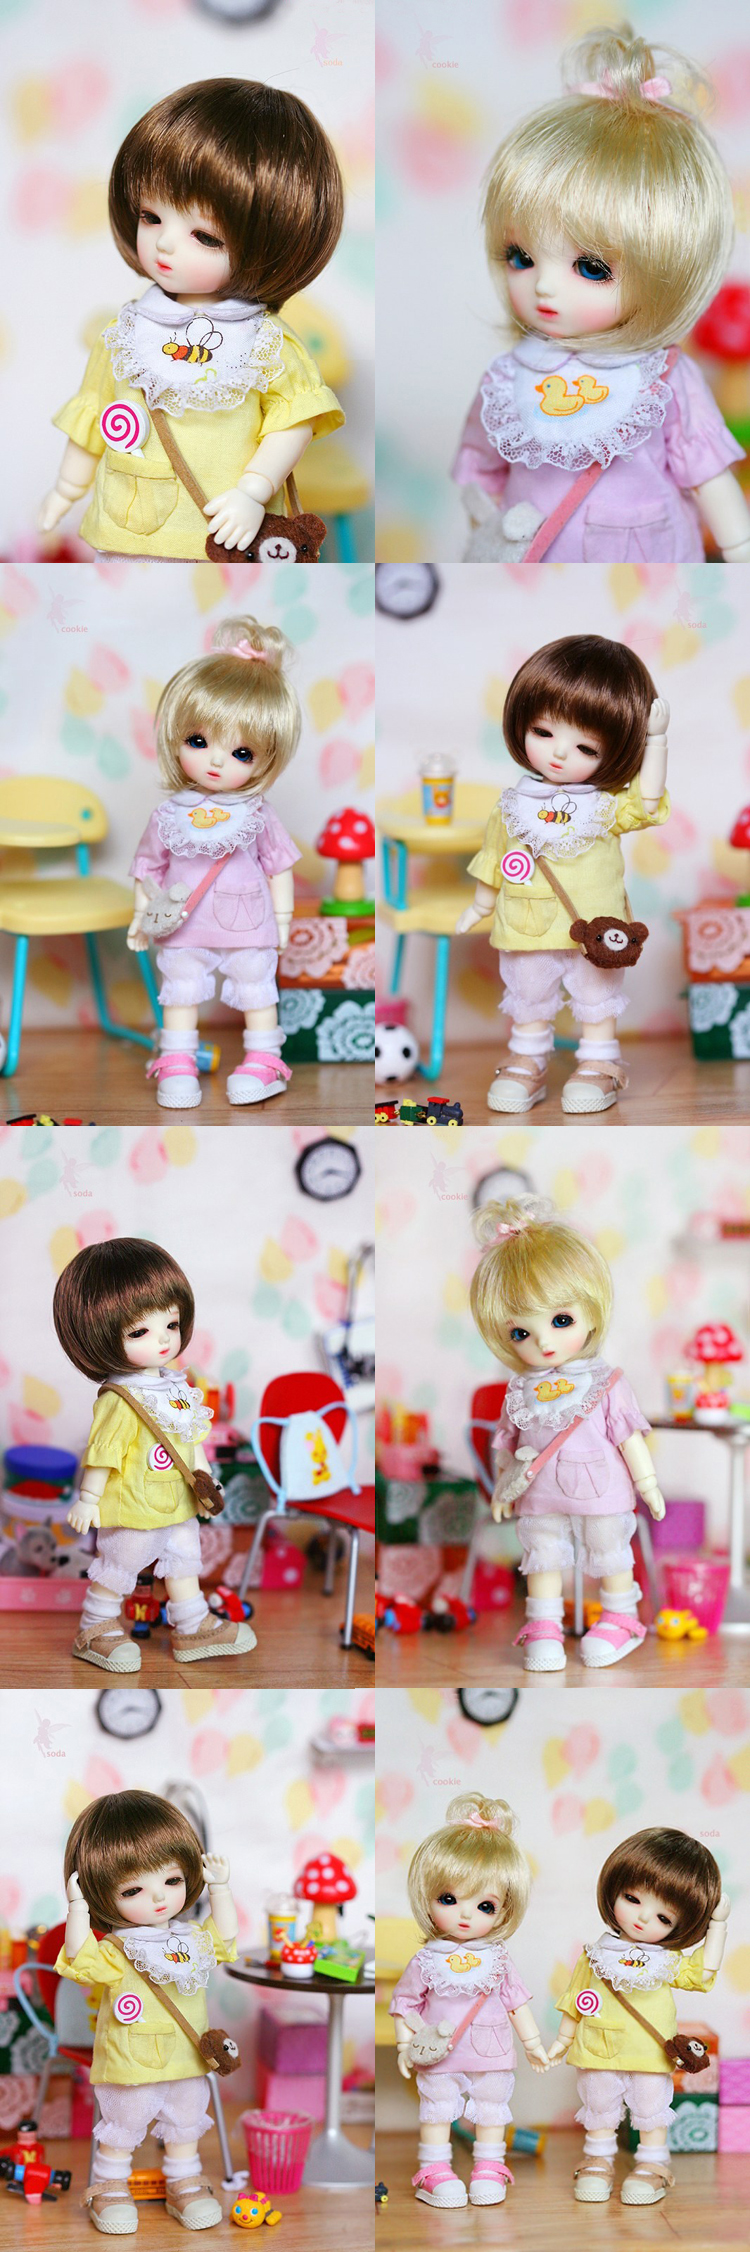 BJD cookie&soda 16cm Girl Ball-jointed Doll